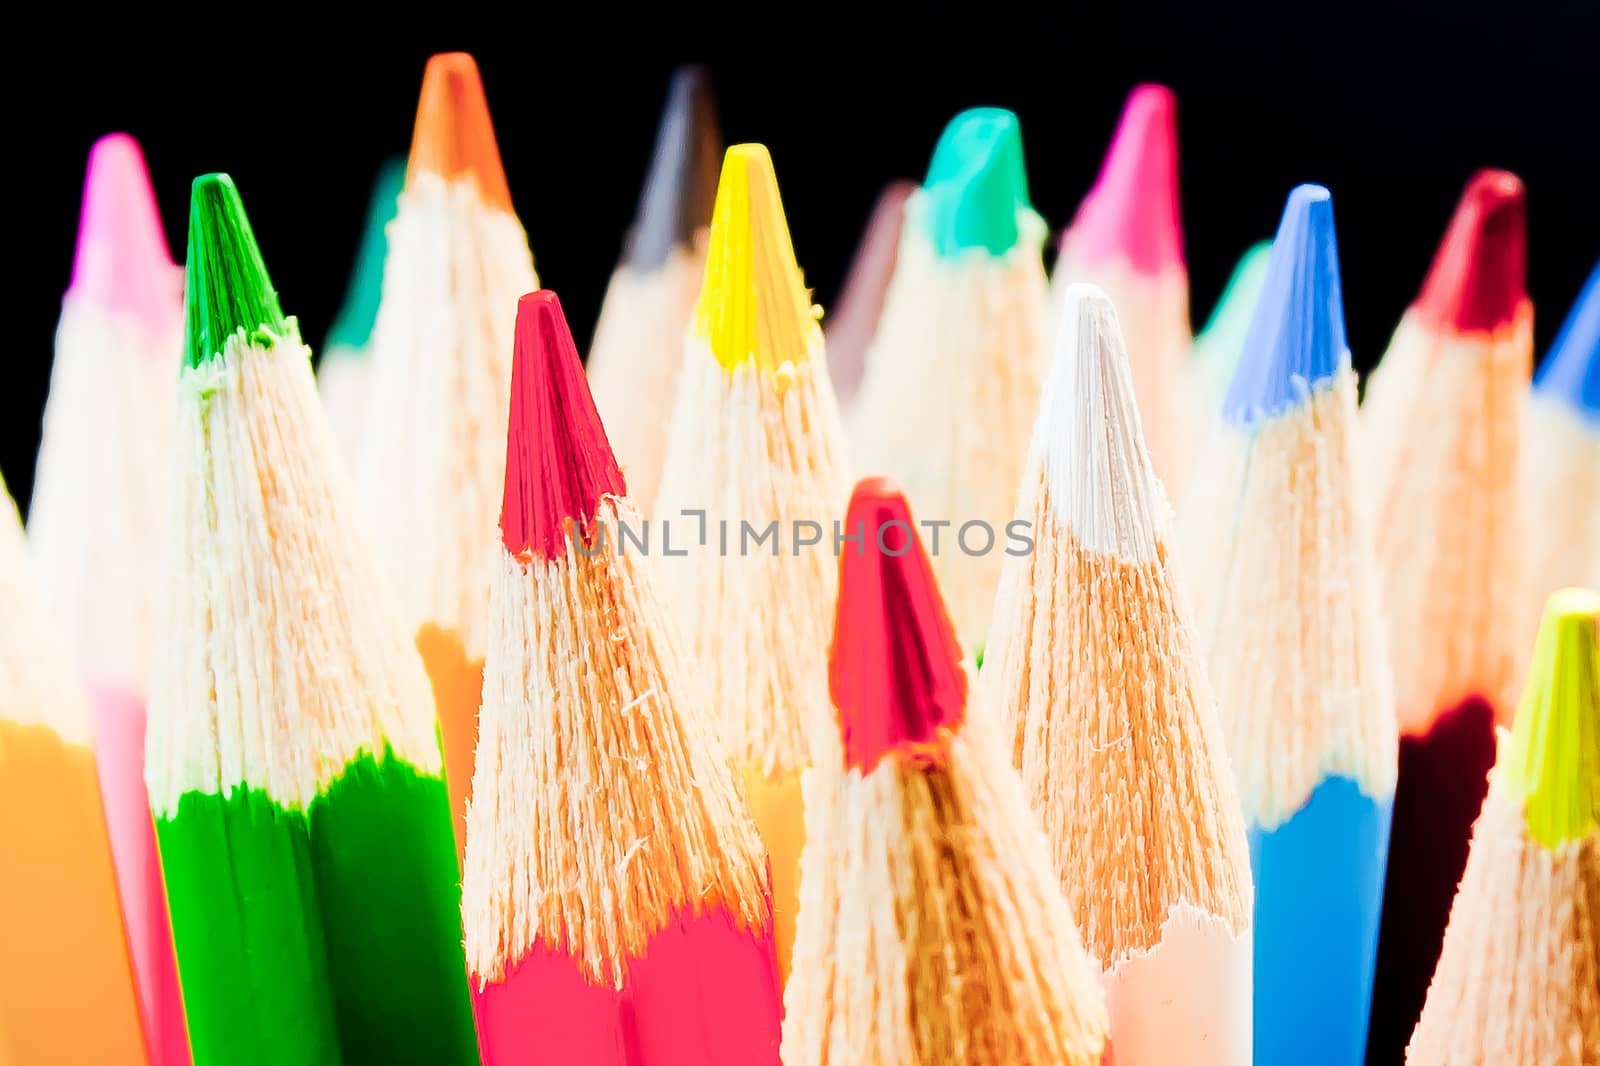 detail of colorful pencils on black background